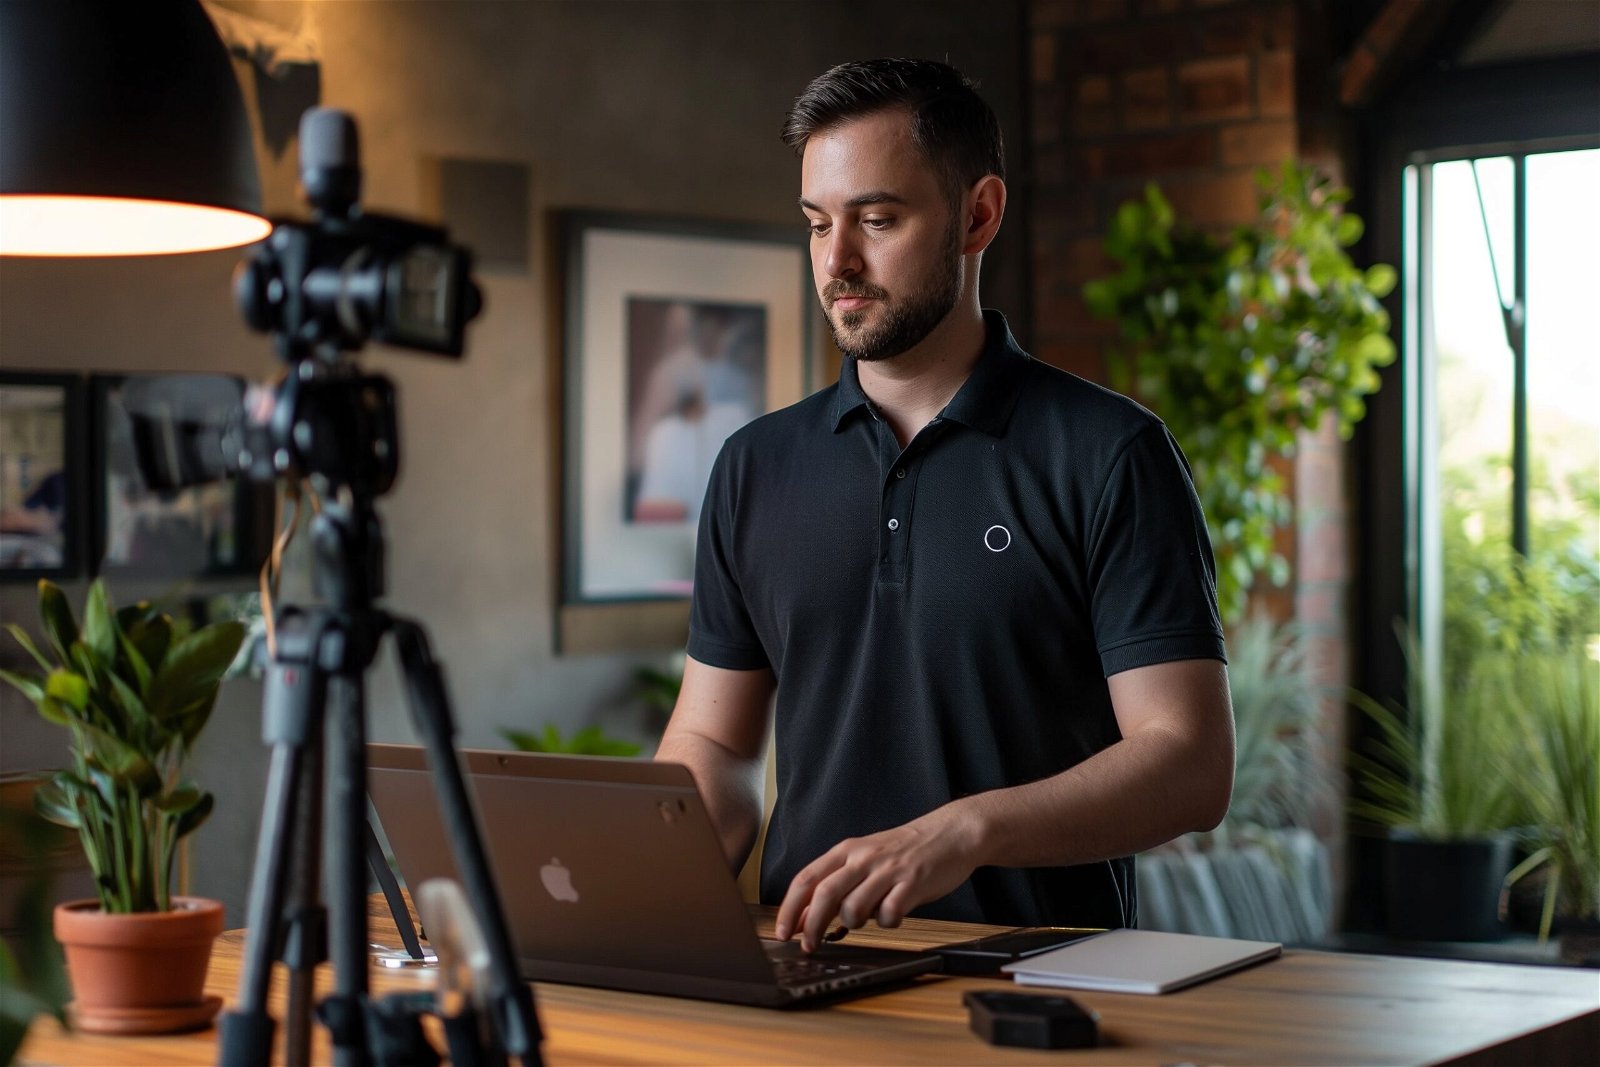 A man standing in a polo shirt, in front of a modern desk with a macbook, microphone and tripod.